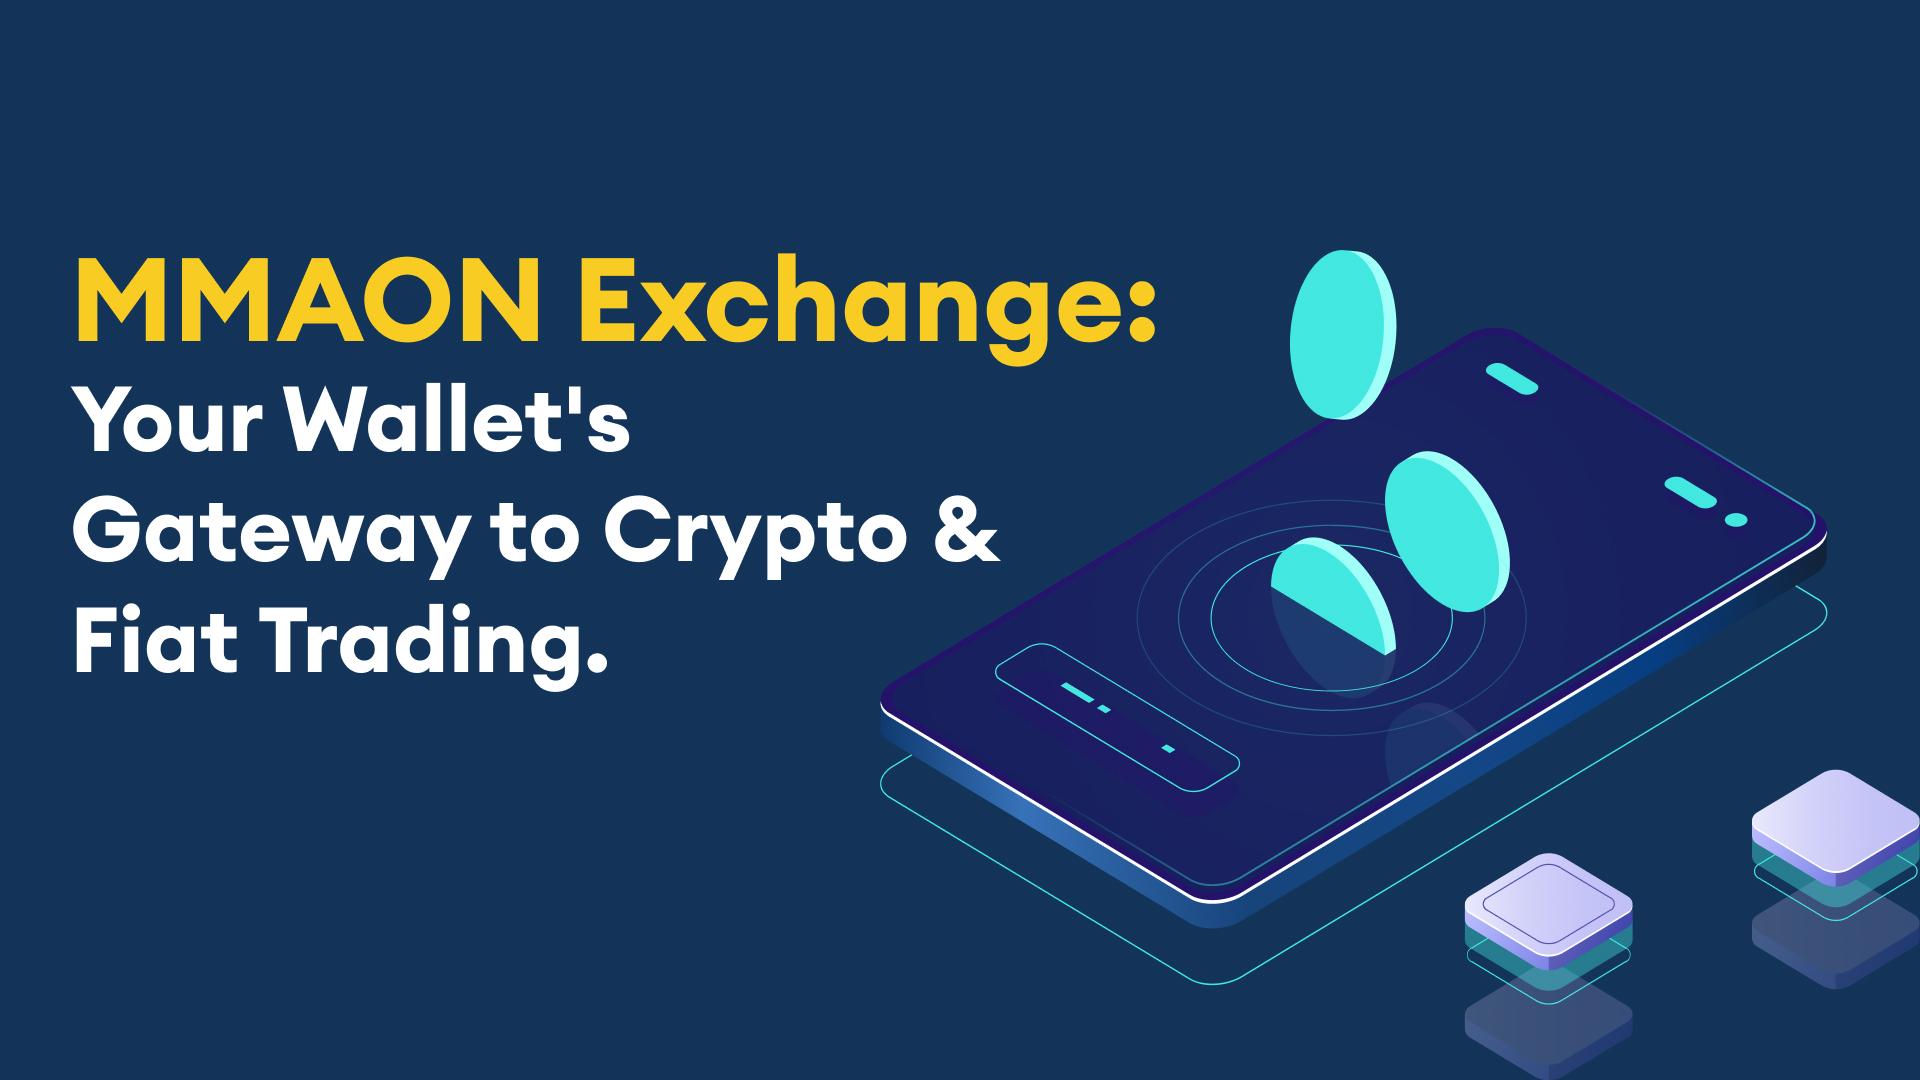 MMAON Exchange: Your Wallet's Gateway to Crypto & Fiat Trading